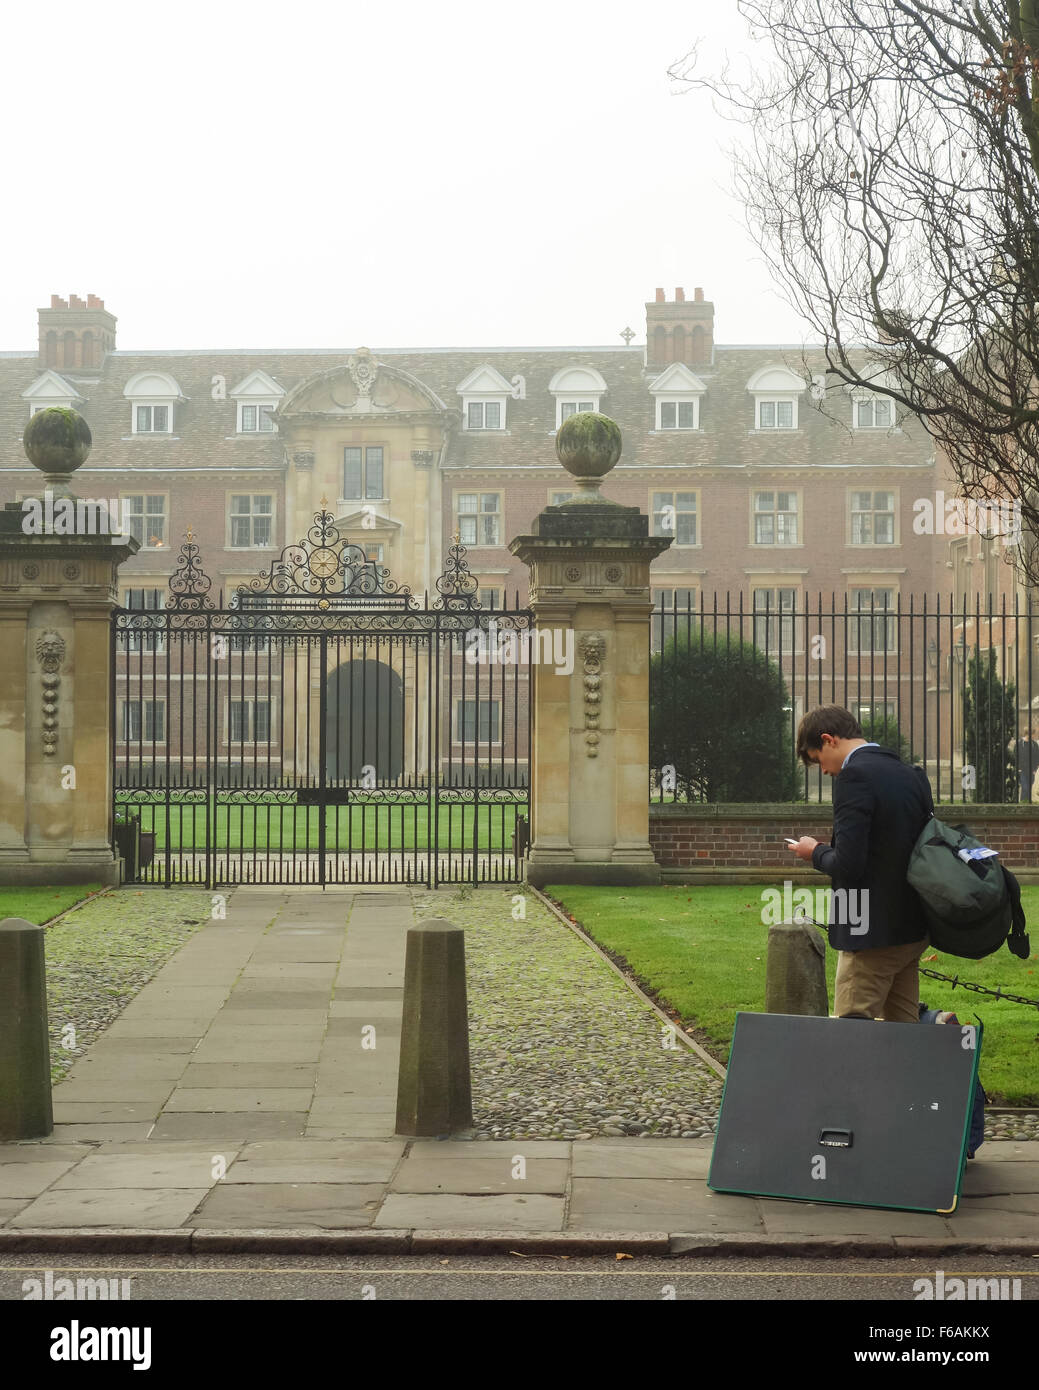 Arriving at Cambridge University - Student with bags luggage and portfolio case at entrance to St Catherine's College, Cambridge Stock Photo